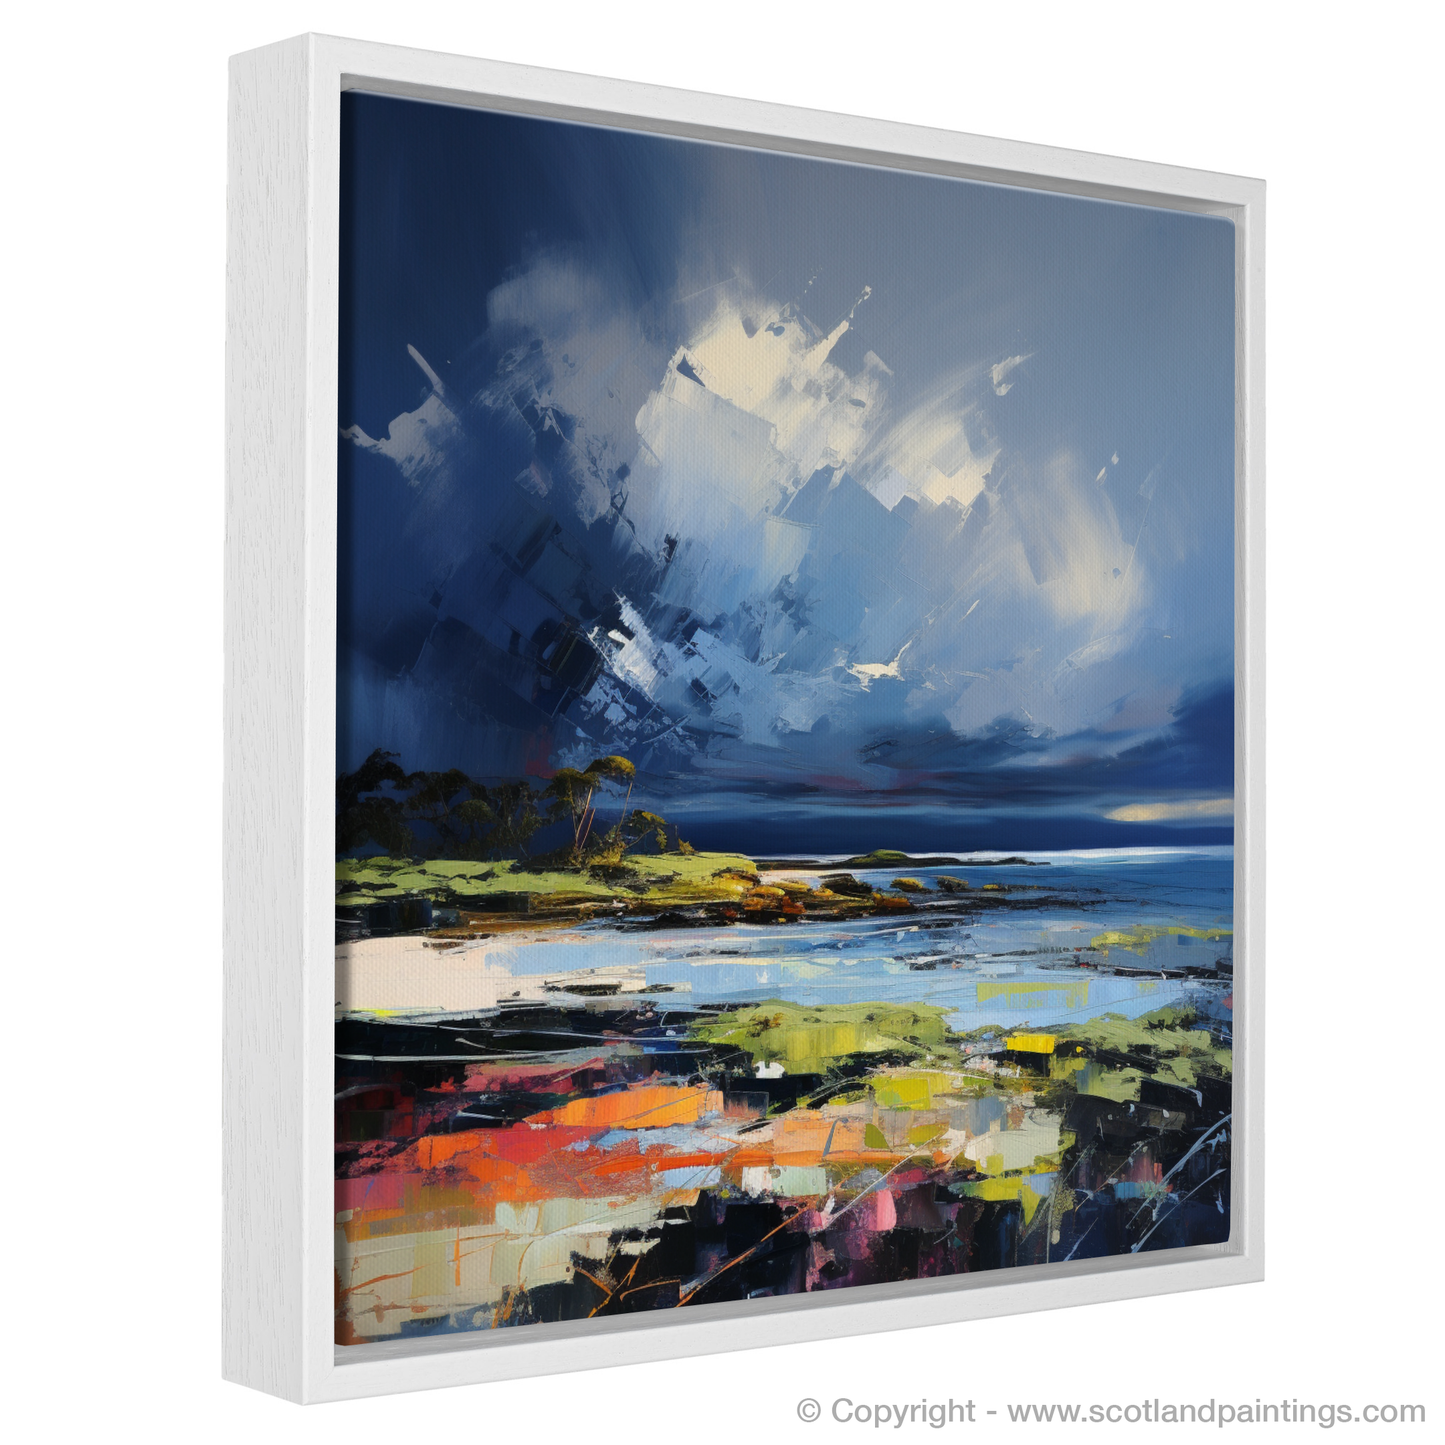 Painting and Art Print of Largo Bay with a stormy sky entitled "Storm Over Largo Bay: An Expressionist Ode to Scottish Shores".